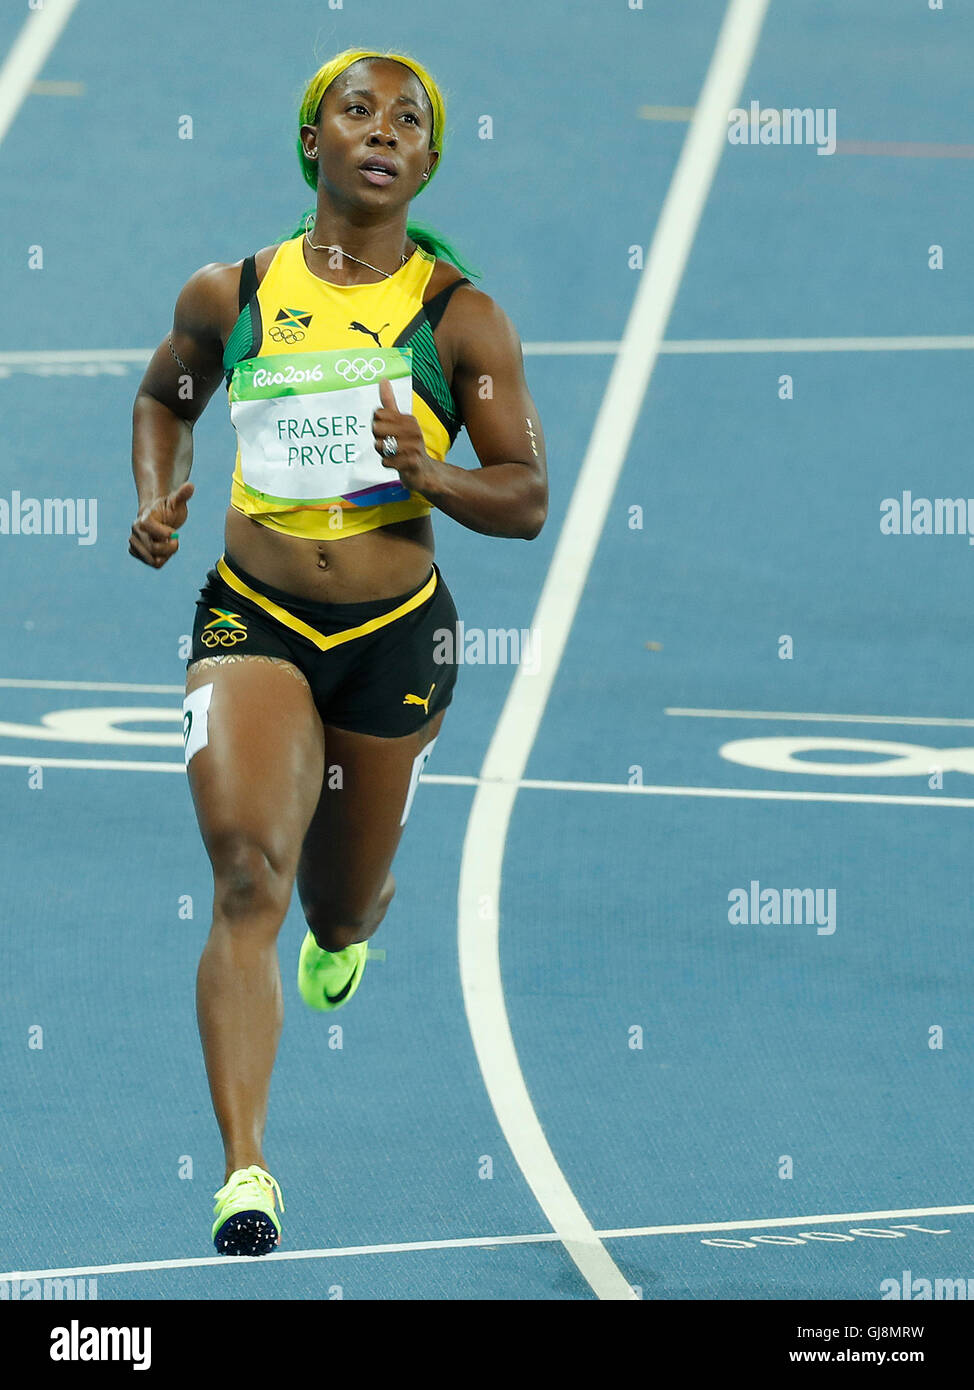 Rio de Janeiro, Brazil. 12th Aug, 2016. ATHLETICS RIO 2016 OLYMPICS - Shelly-Ann Fraser-Pryce of Jamaica during the qualification of the Women&#39;0m in Atn Athletics Rio 2016 Olympics held in the Olympic Stadium. NOT AVAILABLE FOR LICENSING IN CHINA (Photo: Rodolfo Buhrer/La Imagem/Fotoarena) Credit:  Foto Arena LTDA/Alamy Live News Stock Photo